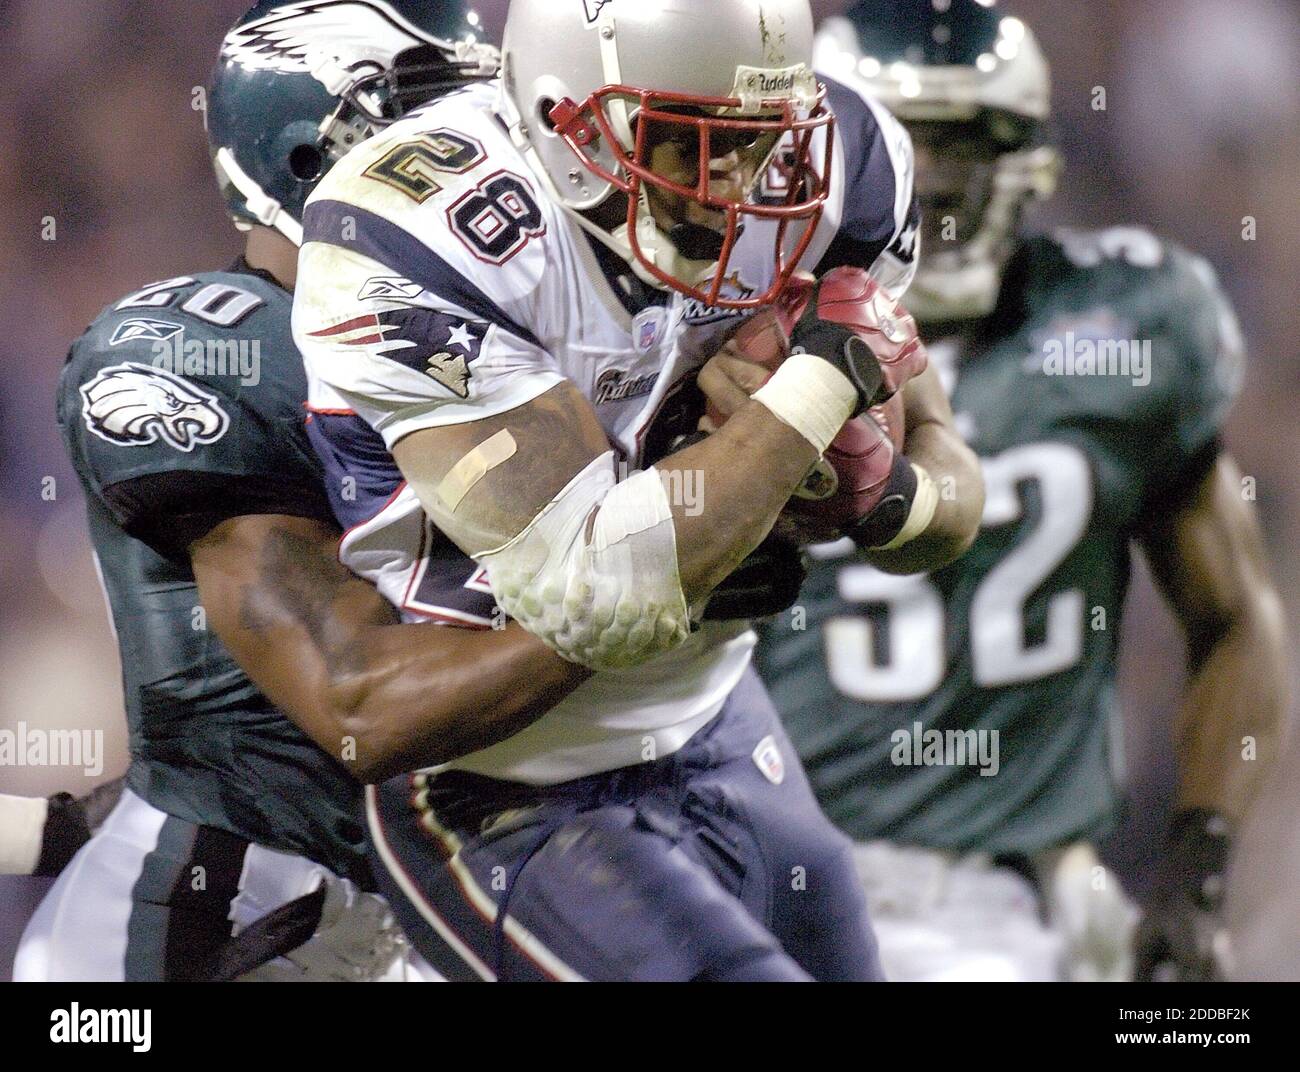 NO FILM, NO VIDEO, NO TV, NO DOCUMENTARY - New England's Corey Dillon (28) is wrapped up by Philadelphia's Brian Dawkins (20) in the second quarter of Super Bowl XXXIX on Sunday, February 6, 2005. Photo by Eric Mencher/Philadelphia Inquirer/KRTCameleon/ABACA. Stock Photo